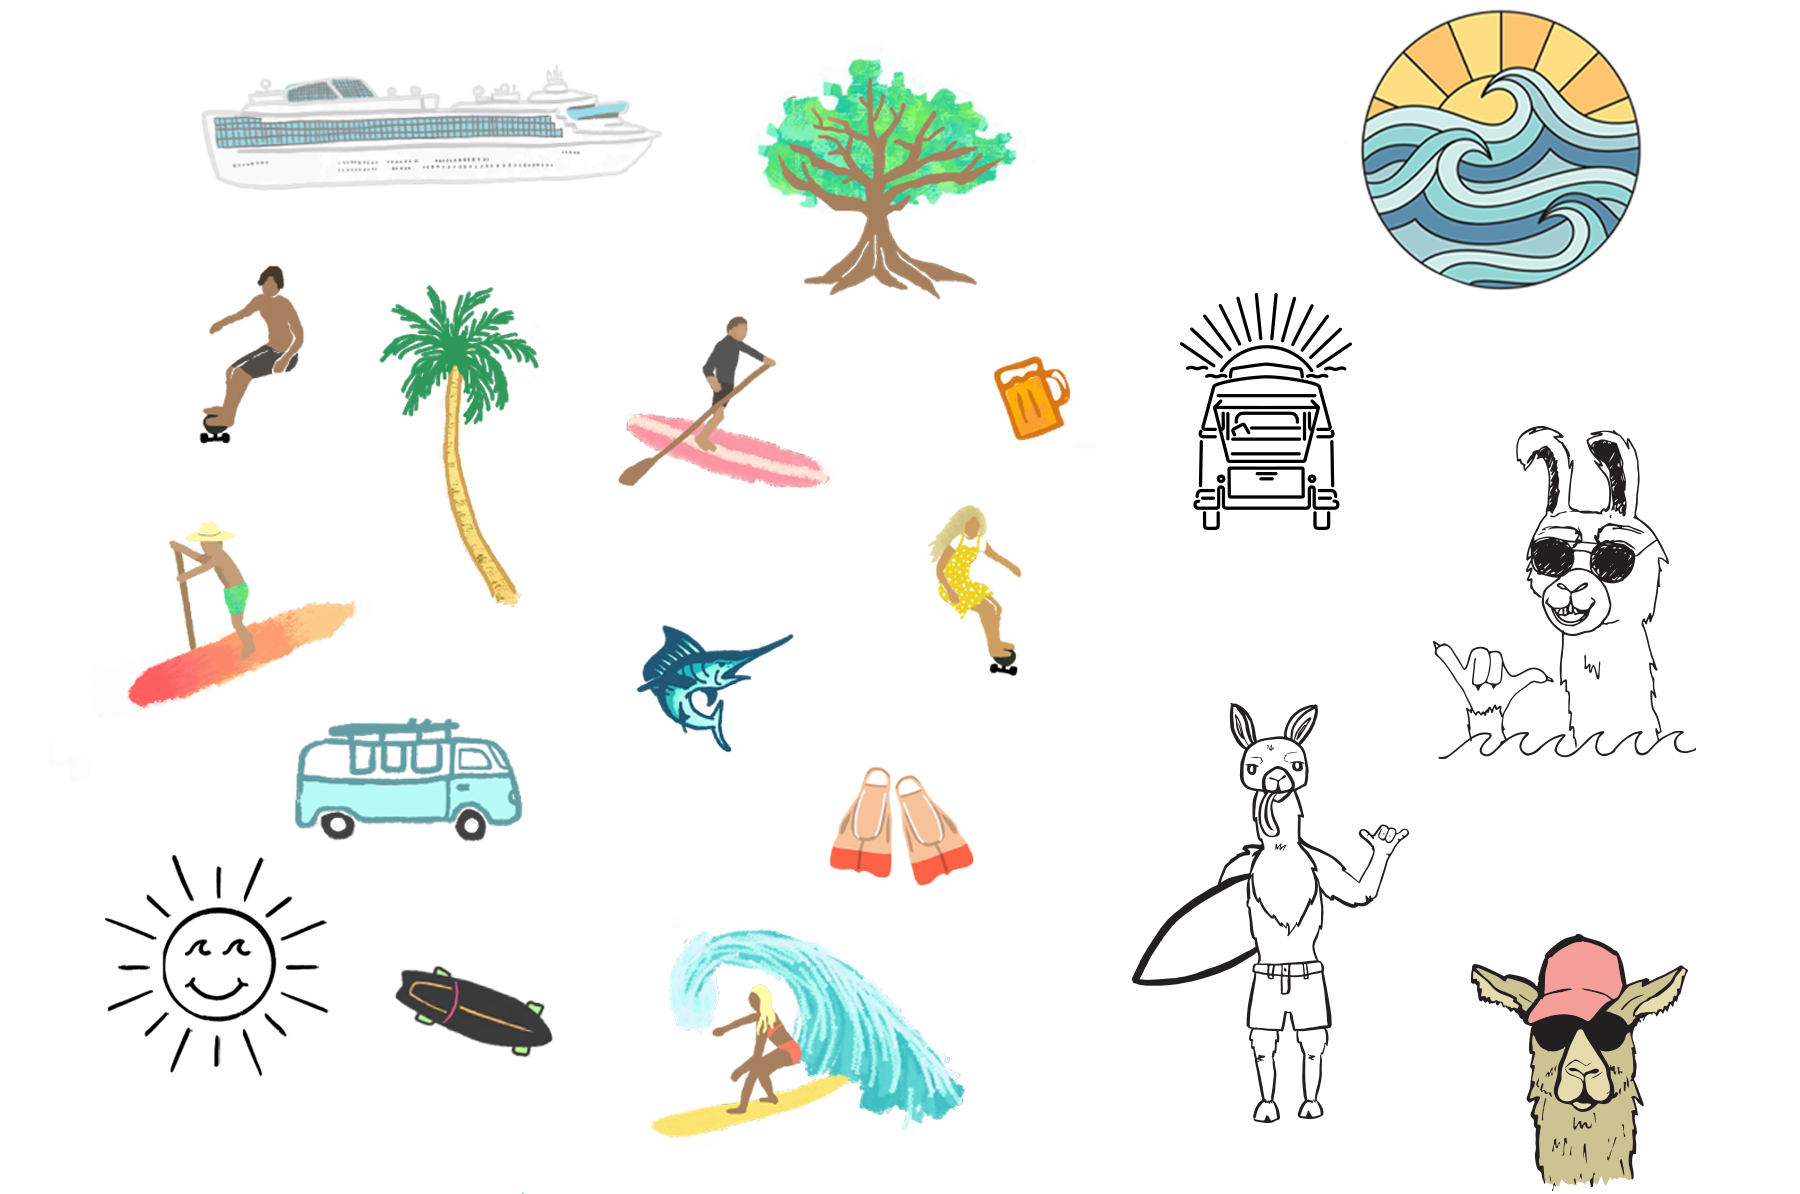 Hand drawn illustrations of skaters, surfers, paddle boarders, a cruise ship, tree, skateboard, flippers, sailfish, vw buses, happy sun, beer mug, surf & sun sticker, and llama characters.